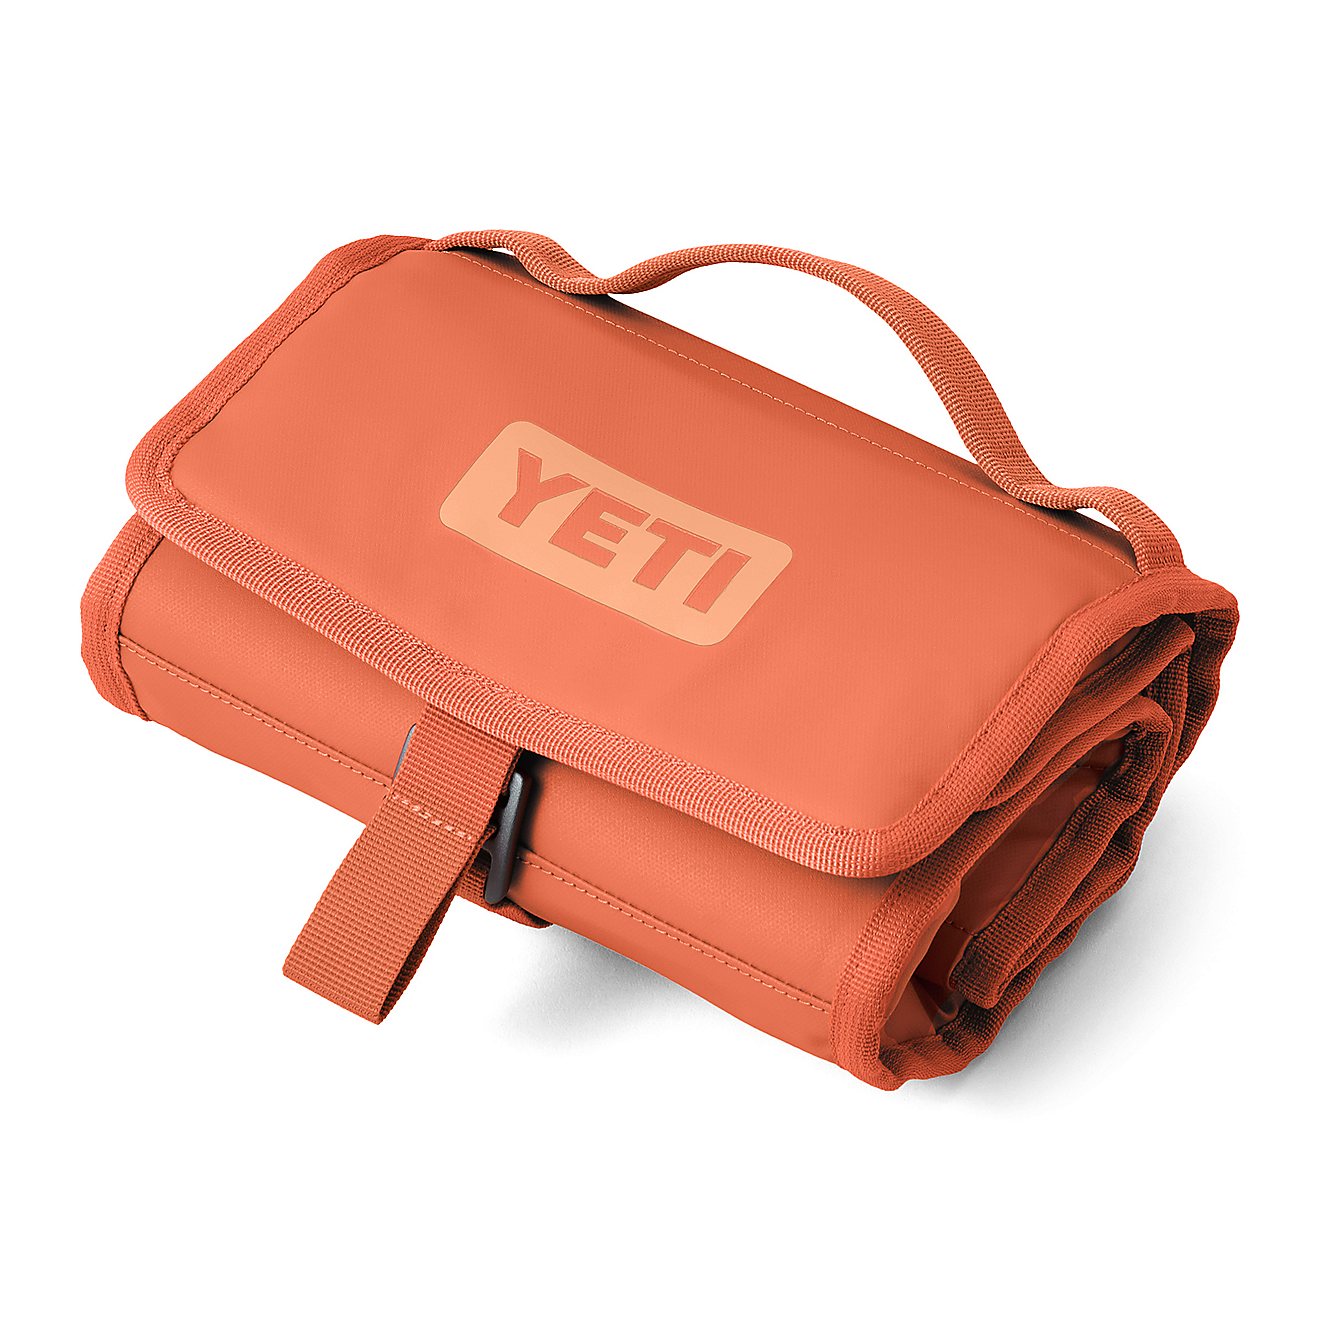 YETI Daytrip Lunch Bag                                                                                                           - view number 3